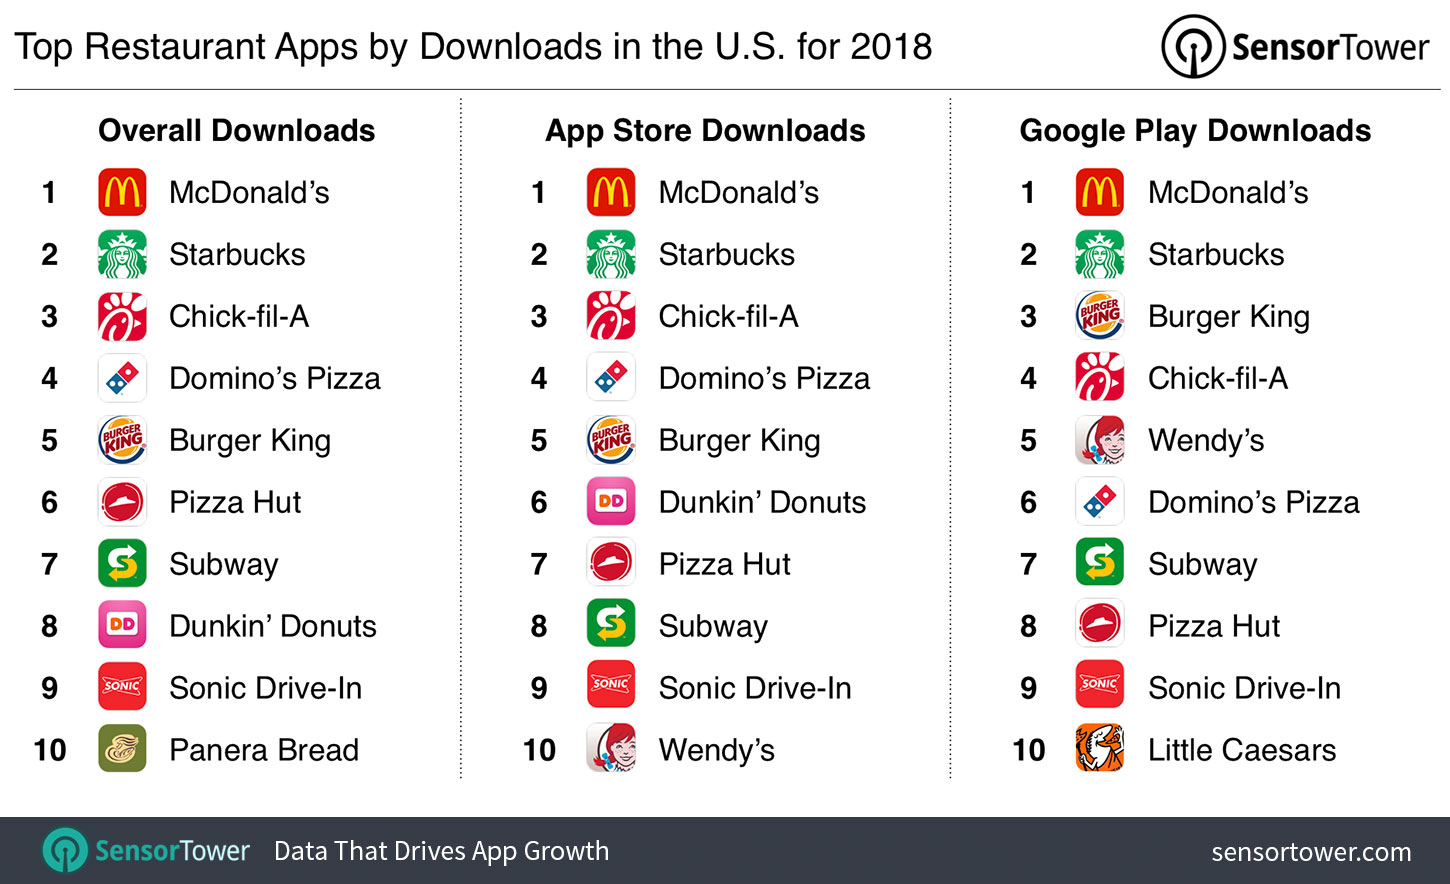 Top Restaurant Apps by Downloads in the U.S. for 2018